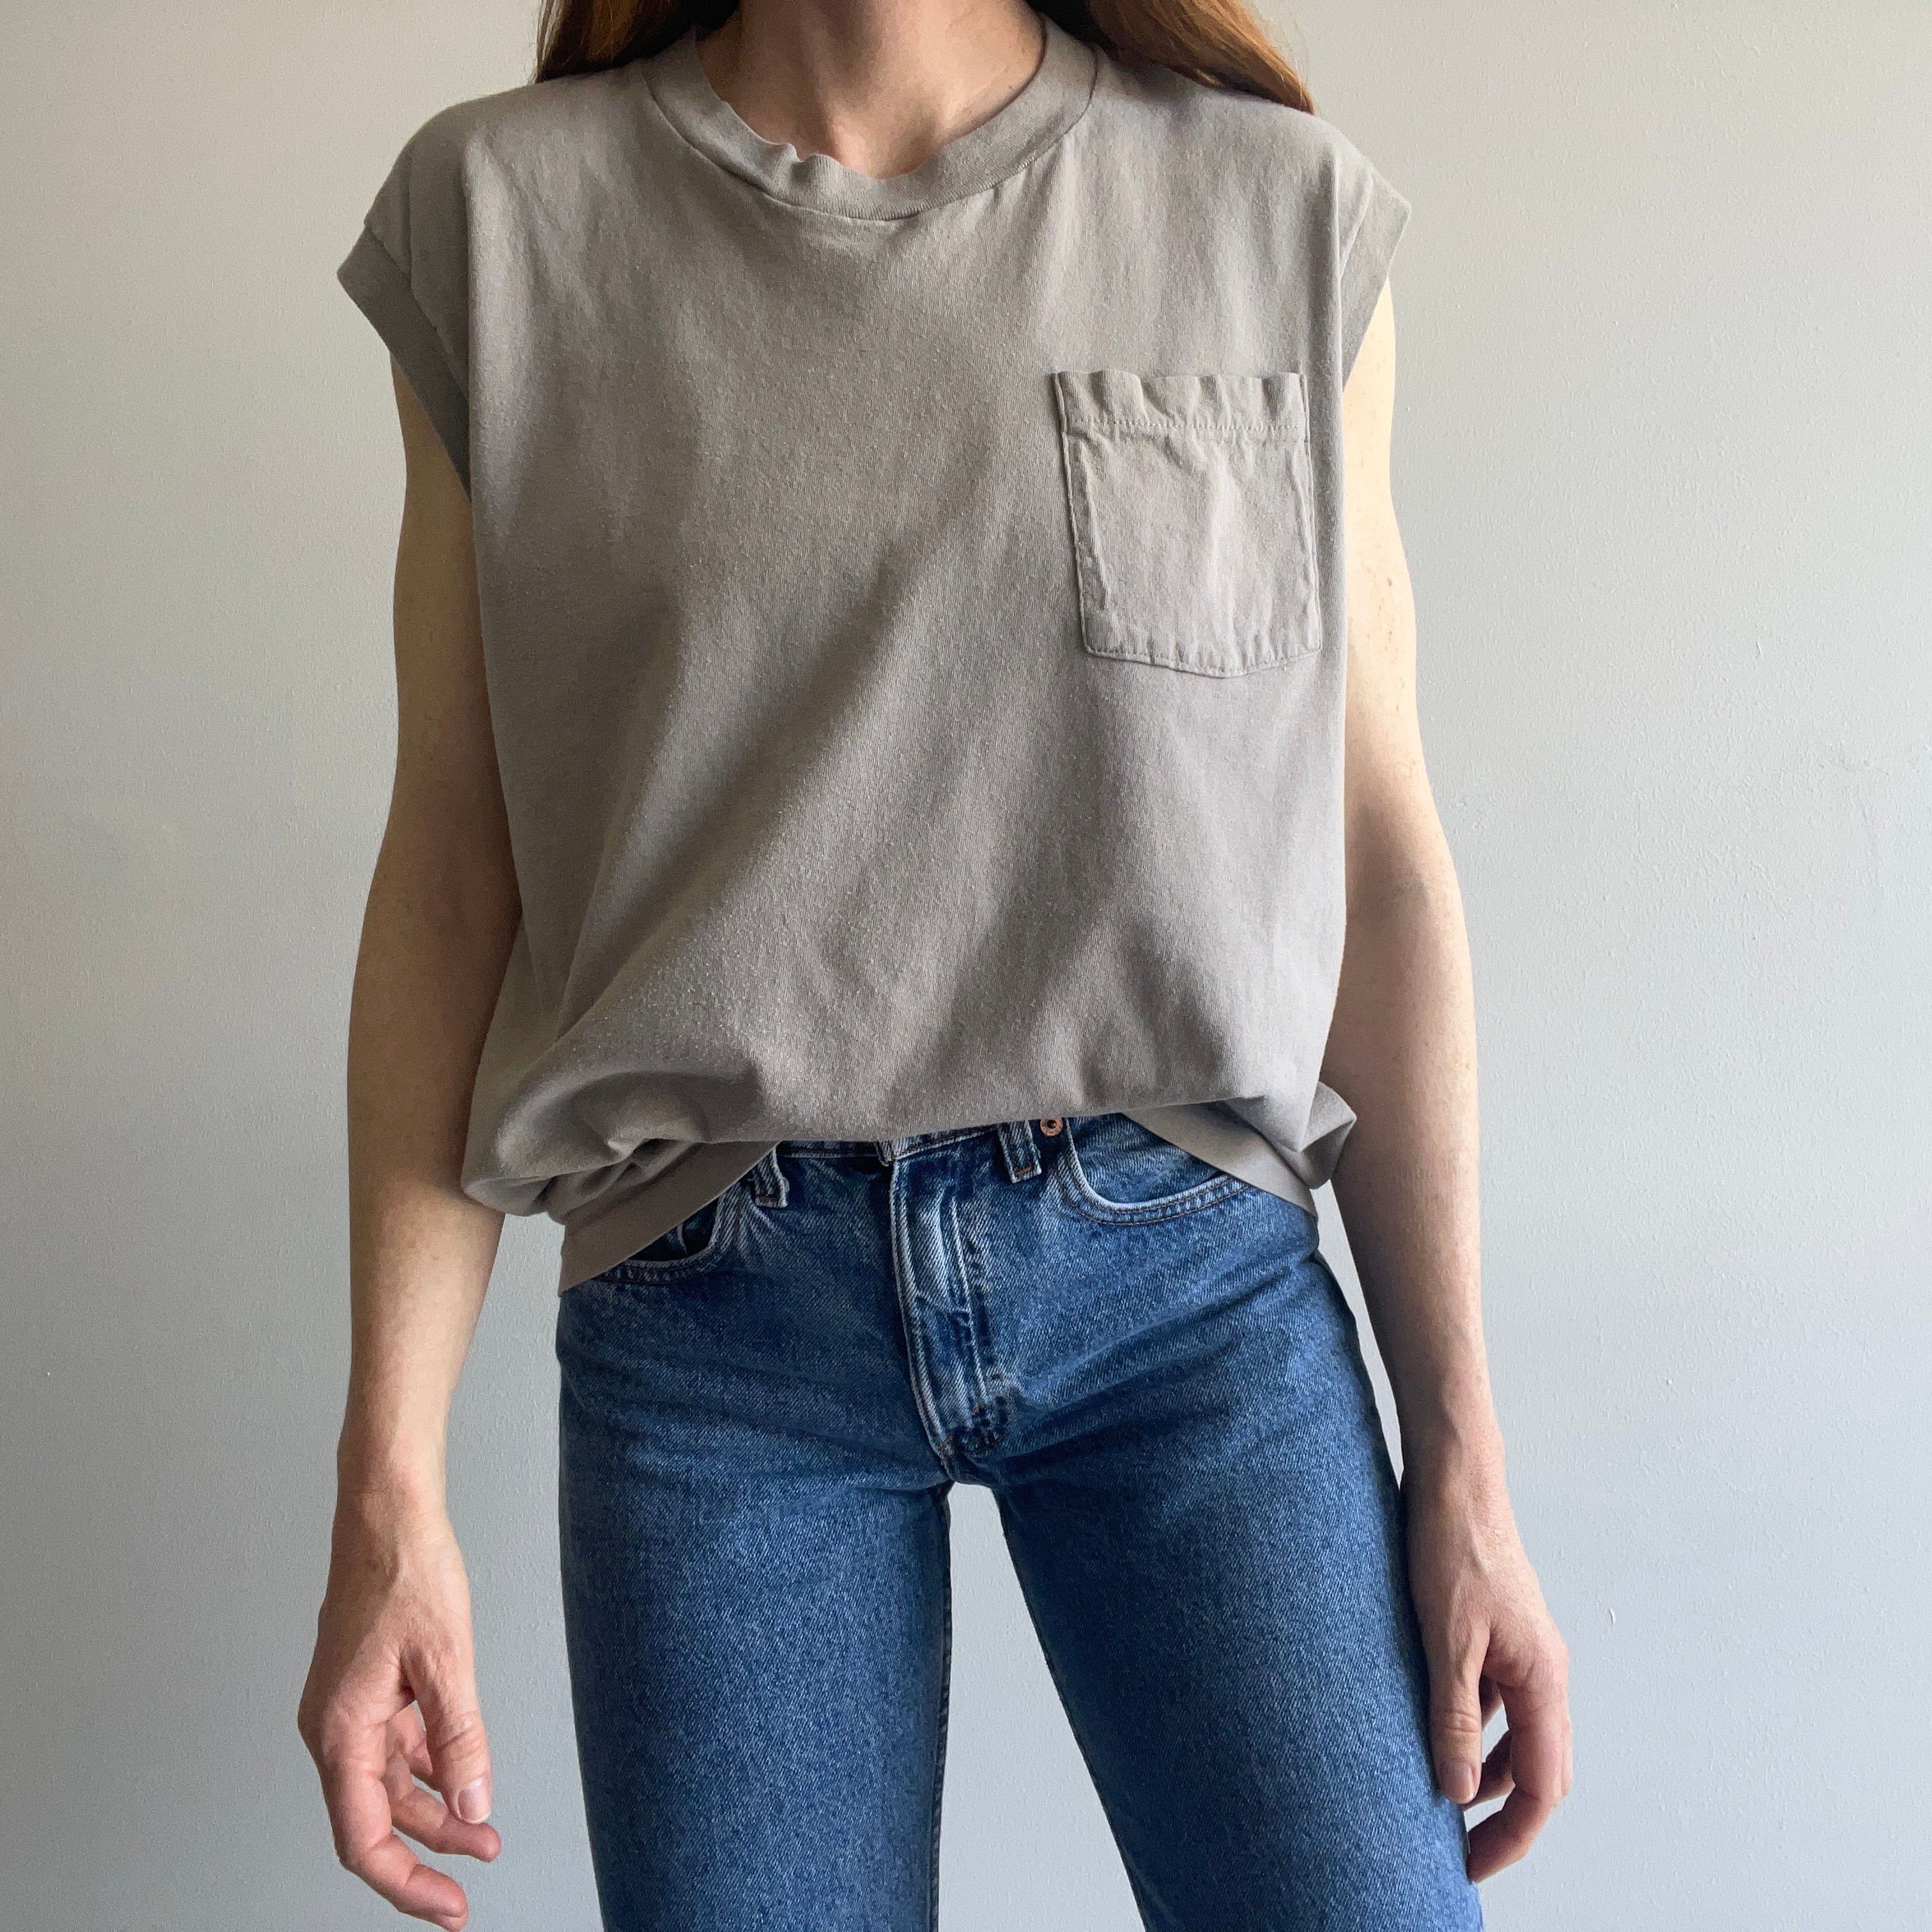 1980s Khaki Muscle Tank Top with a Selvedge Pocket